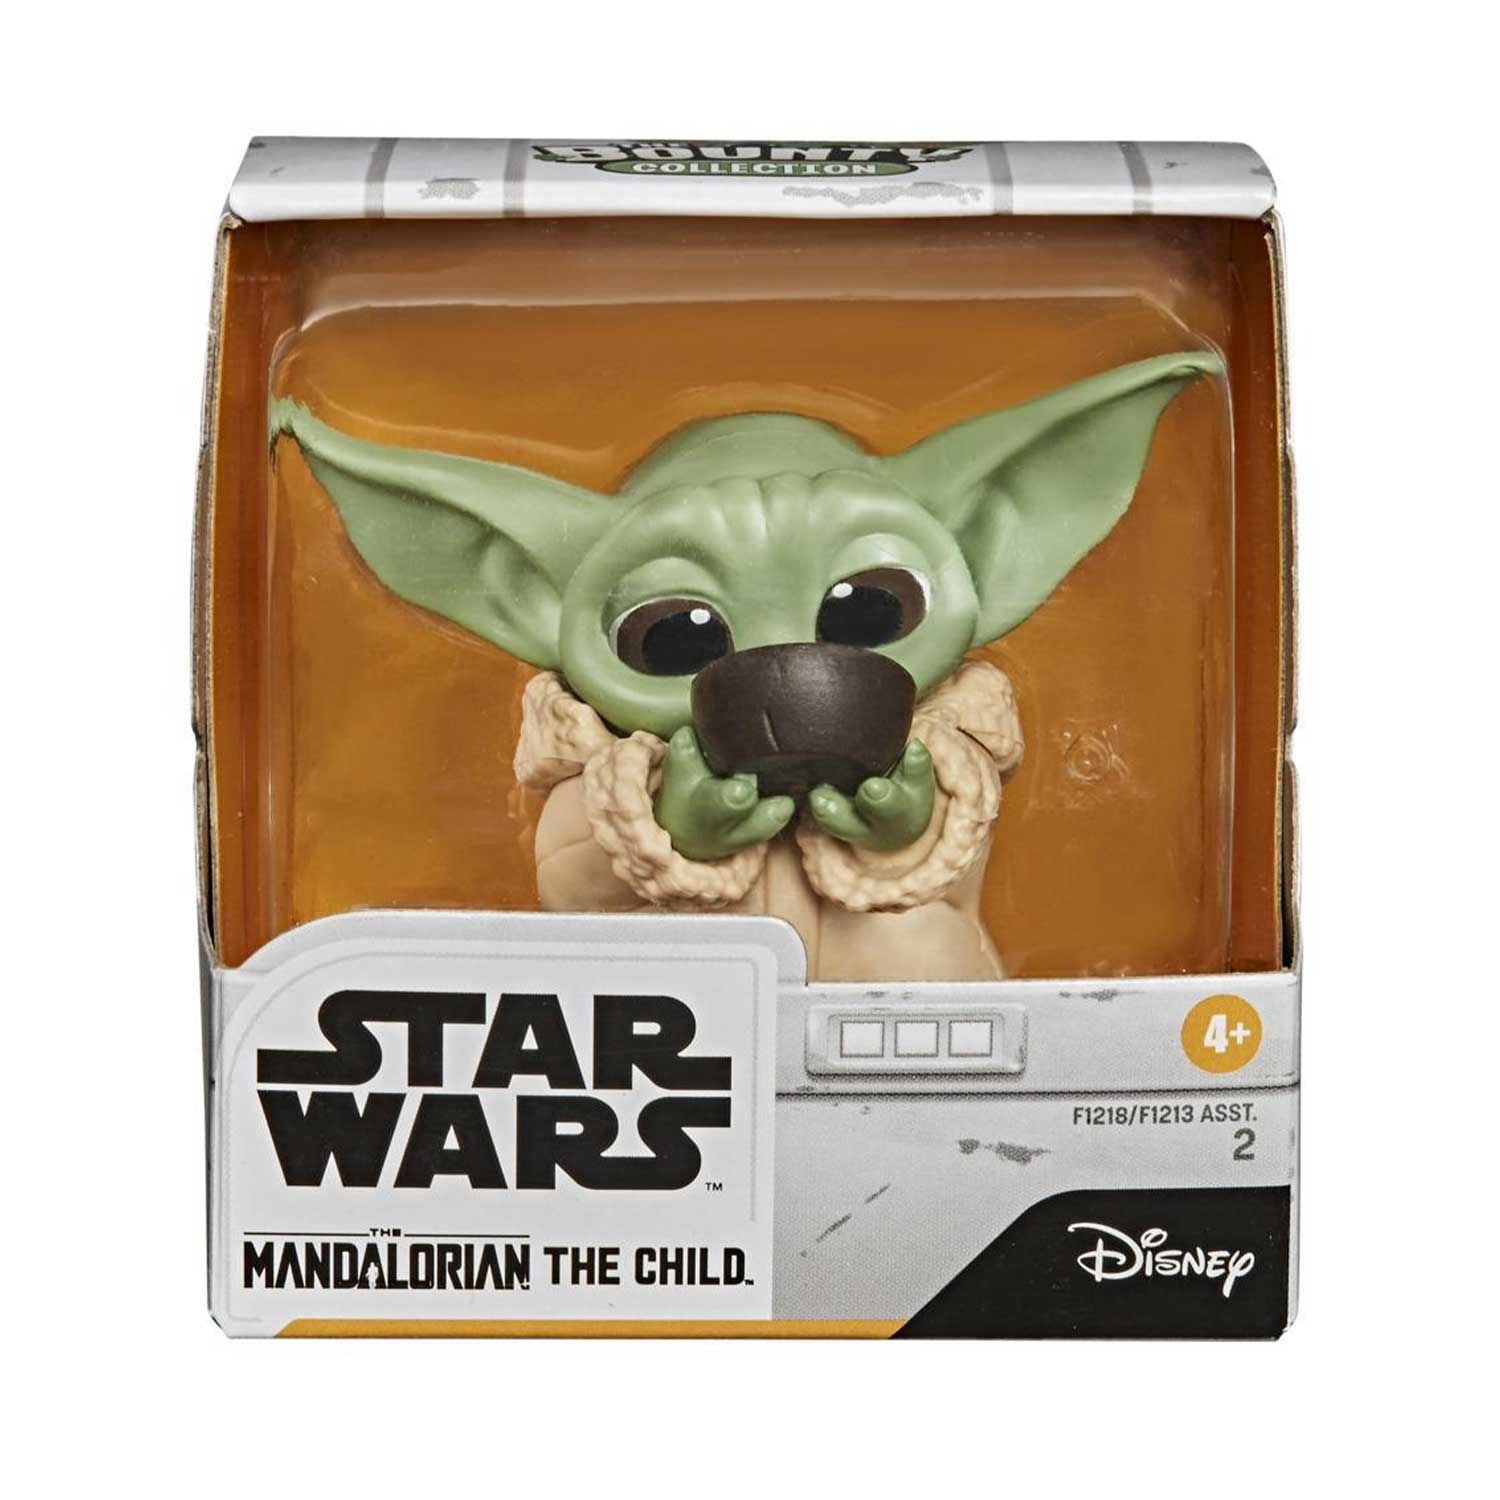 Star Wars The Bounty Collection The Child Collectible Toy 2.2-Inch The Mandalorian “Baby Yoda” Sipping Soup Pose Figure - Mod: HSBF12185L0